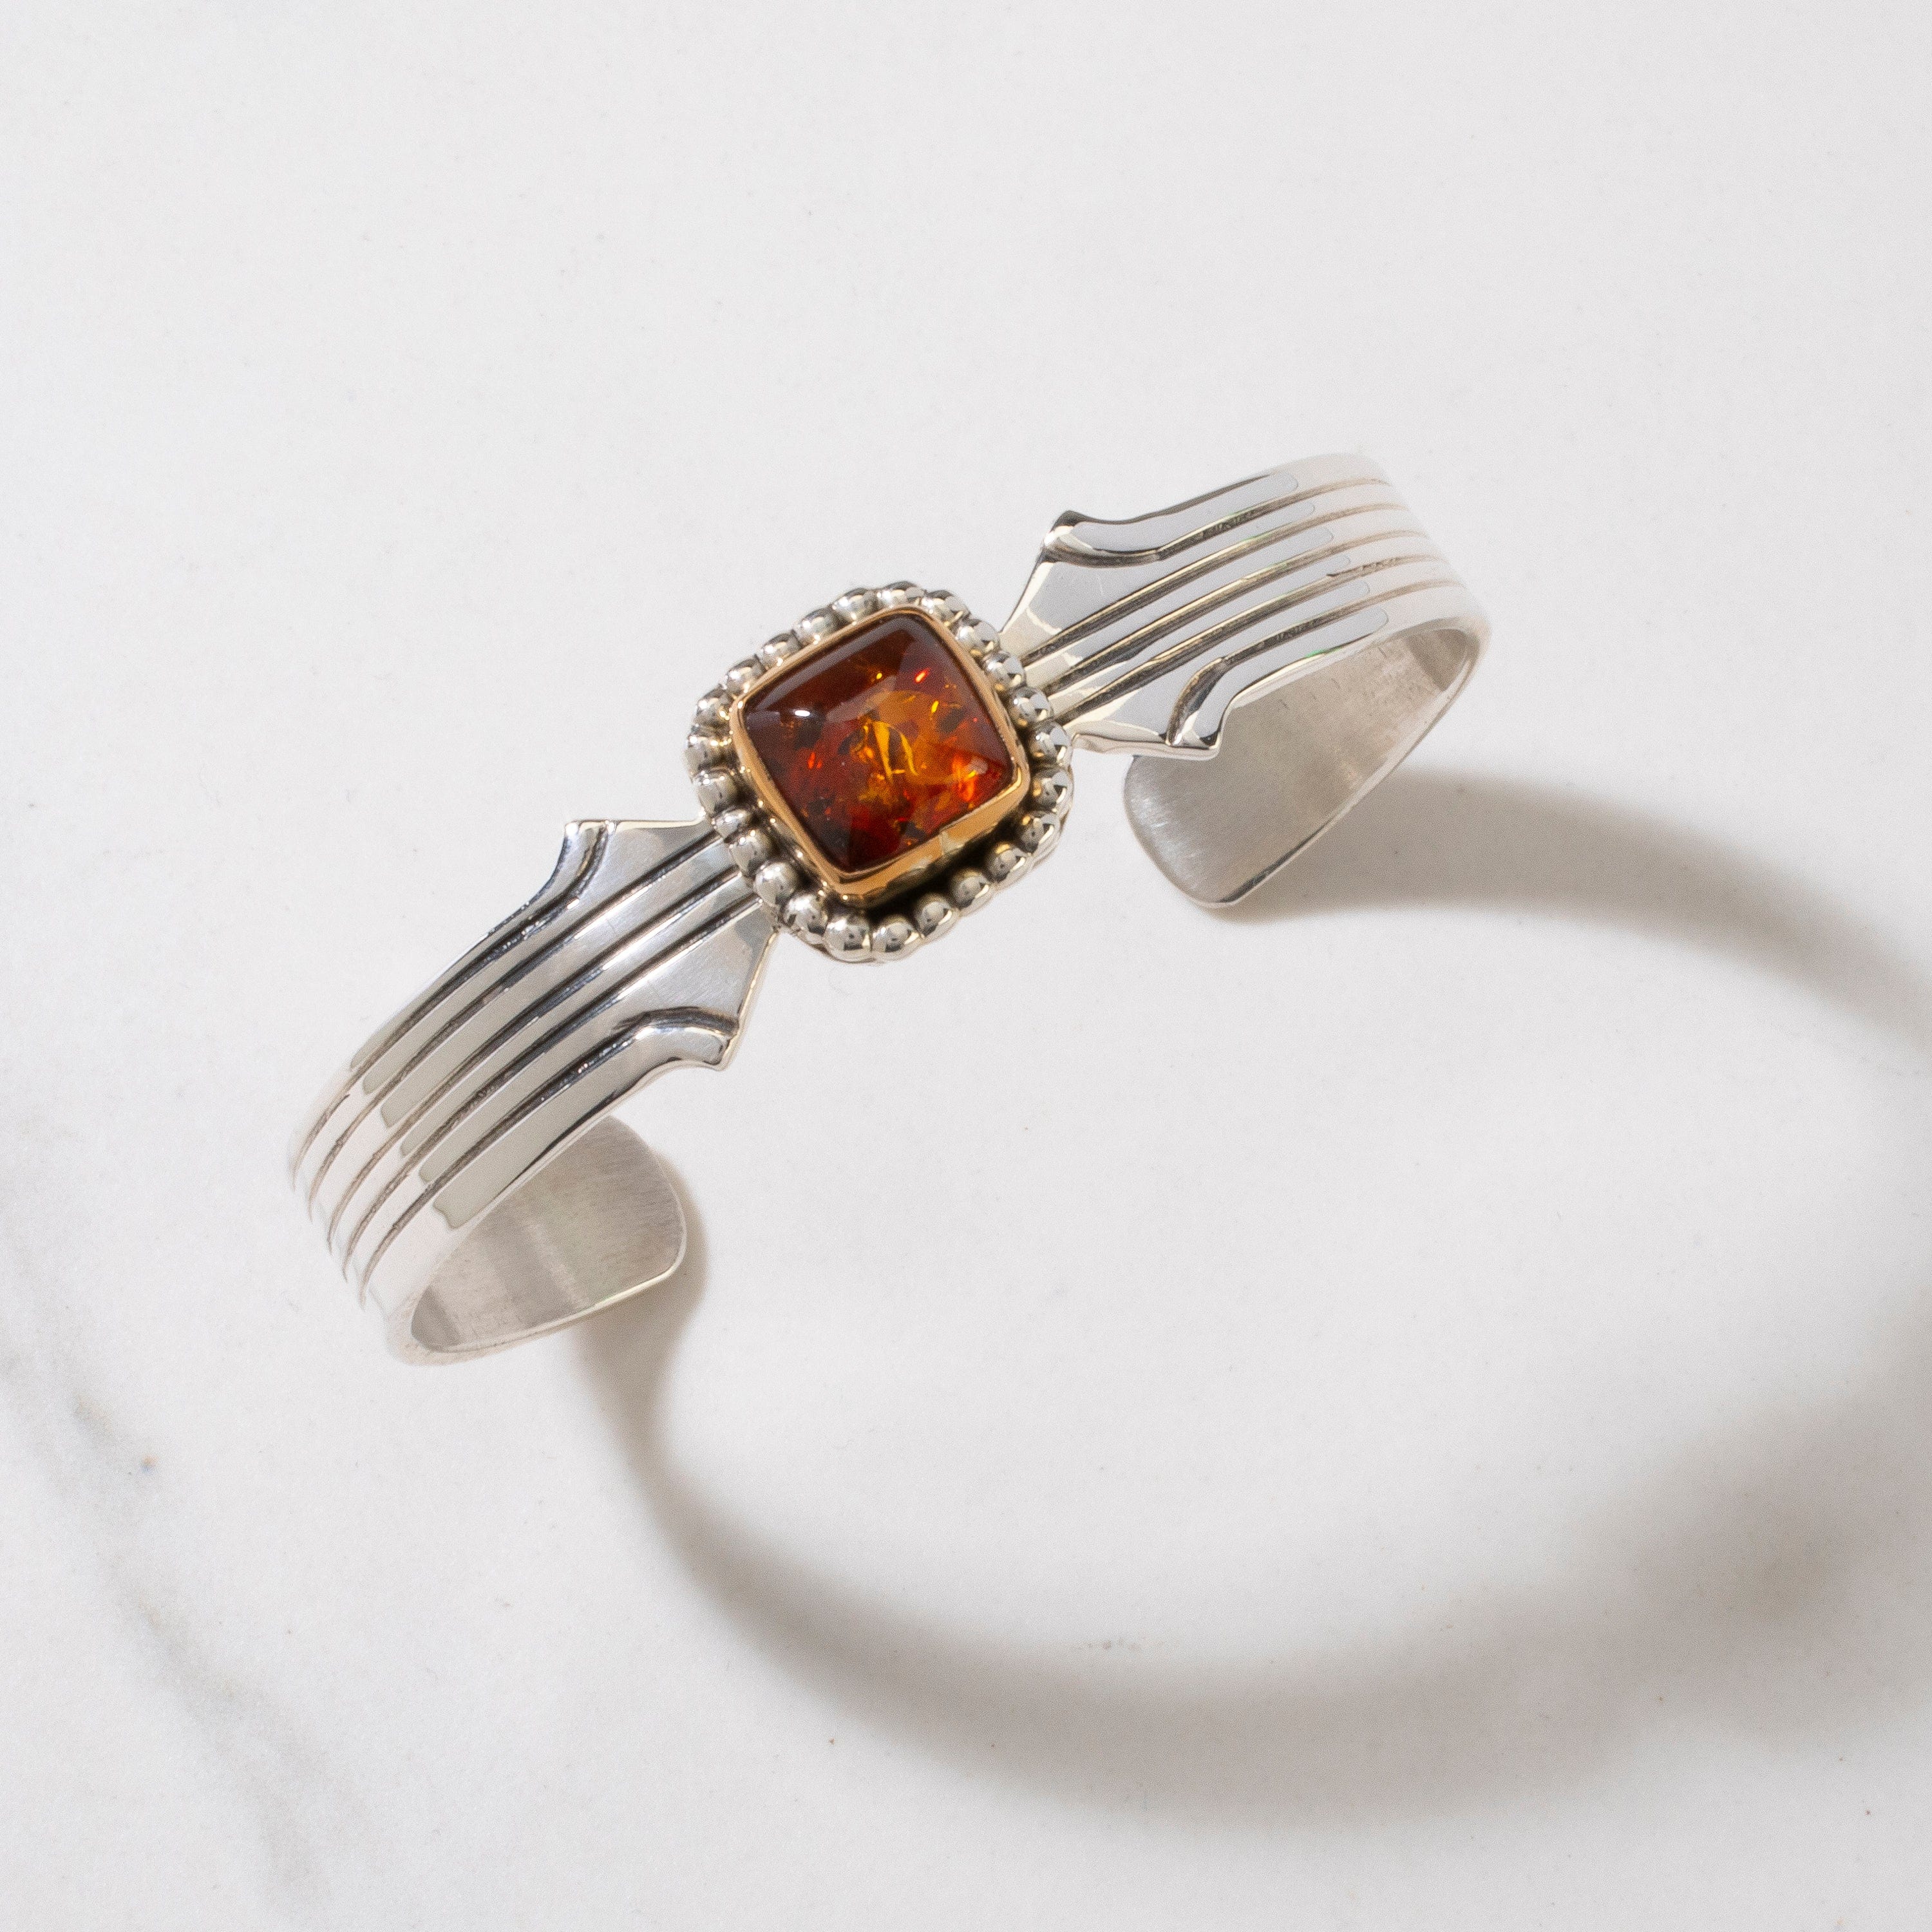 Kalifano Native American Jewelry Amber Navajo USA Native American Made 925 Sterling Silver & 12K Gold Filled Cuff NAB900.027